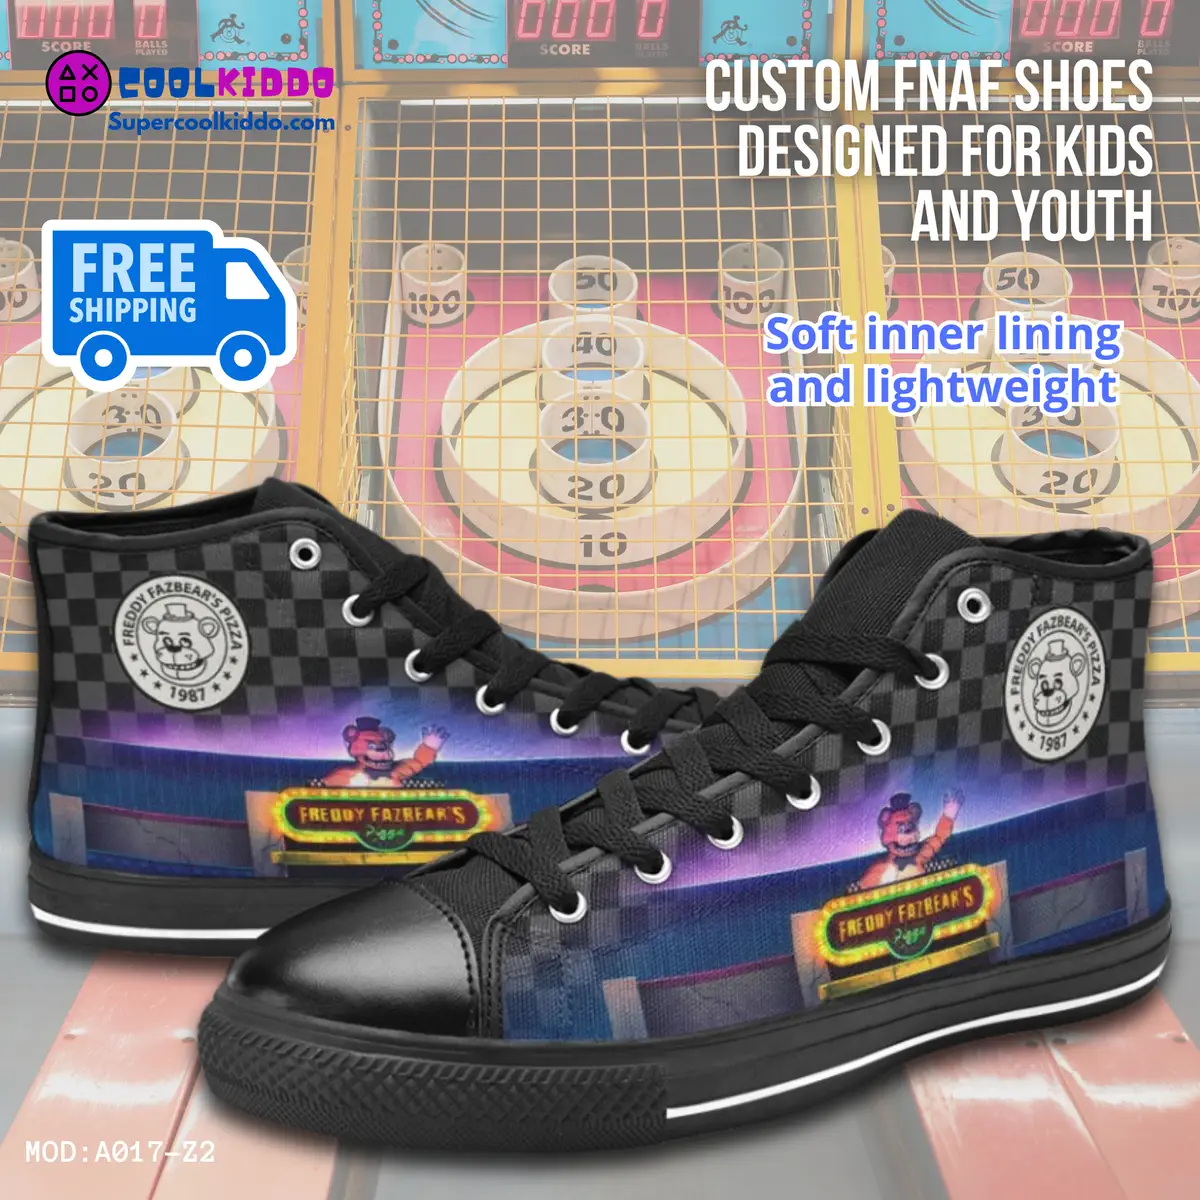 Five Nights at Freddy’s Movie Inspired High Top Shoes for Kids/Youth – Sneakers, Horror FNAF Movie Characters Cool Kiddo 10